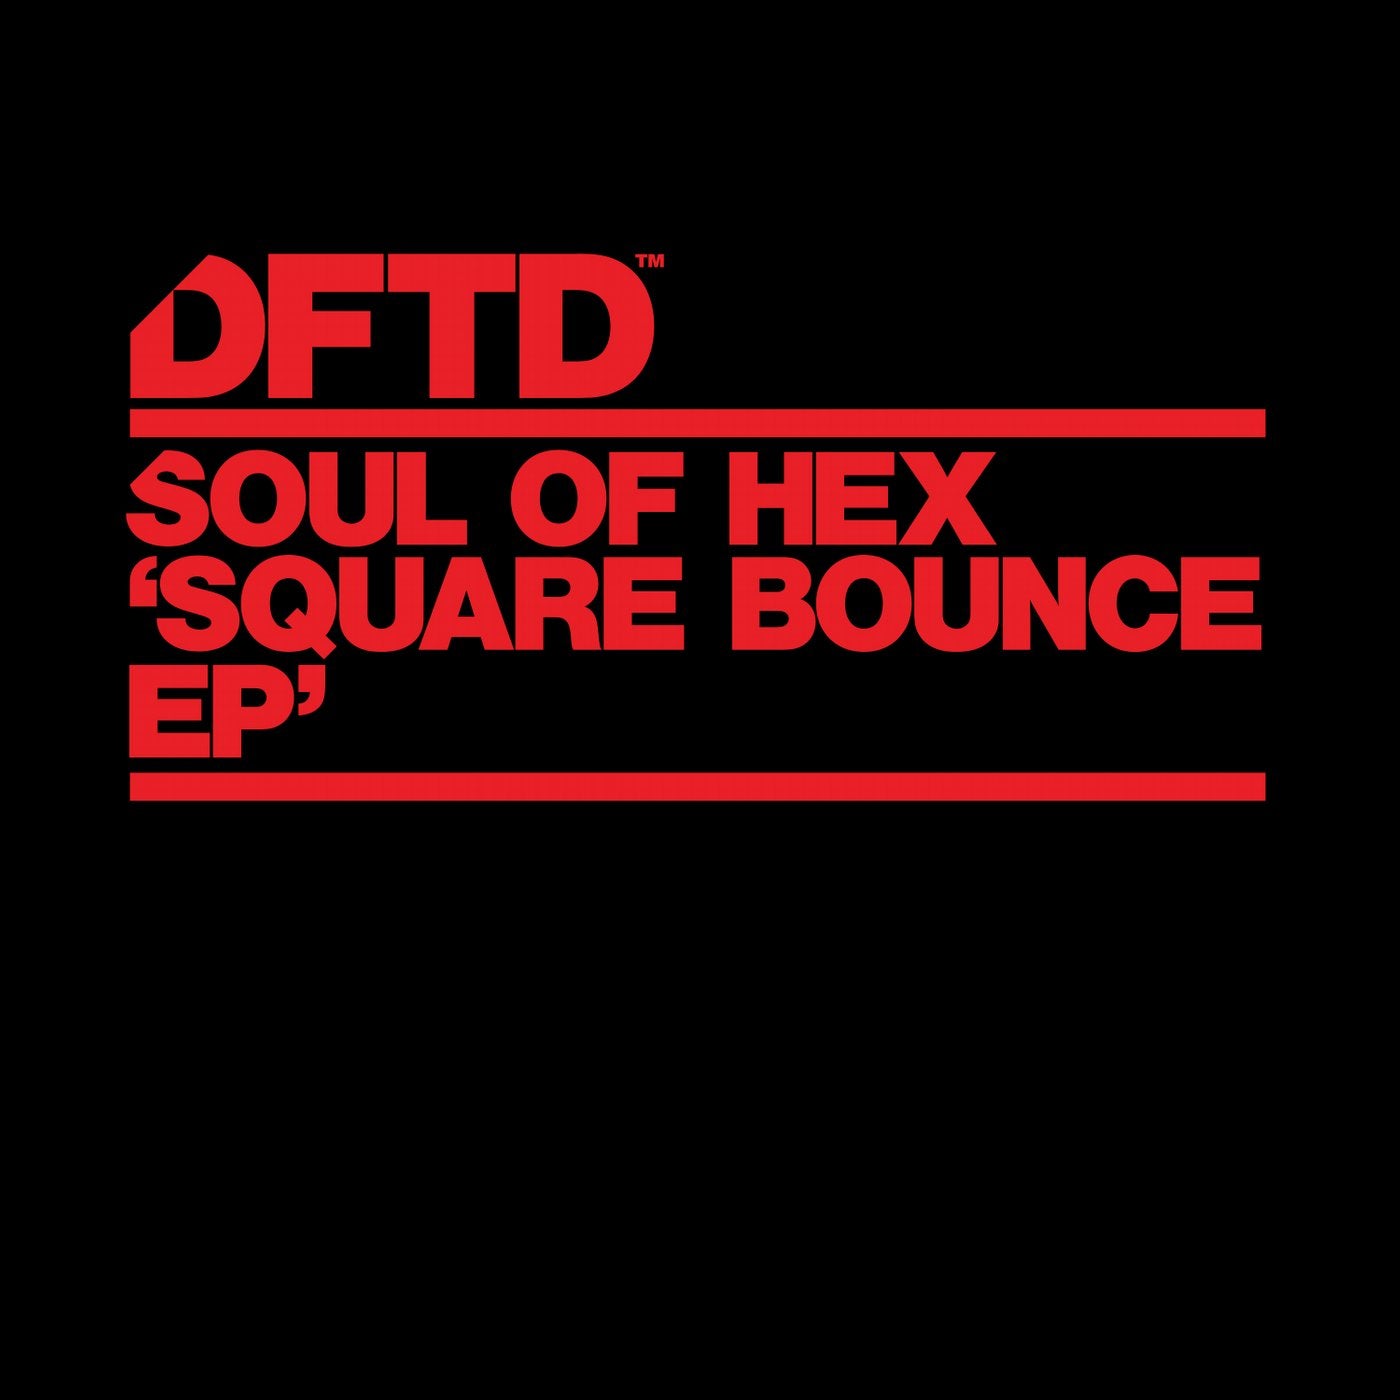 Square Bounce EP